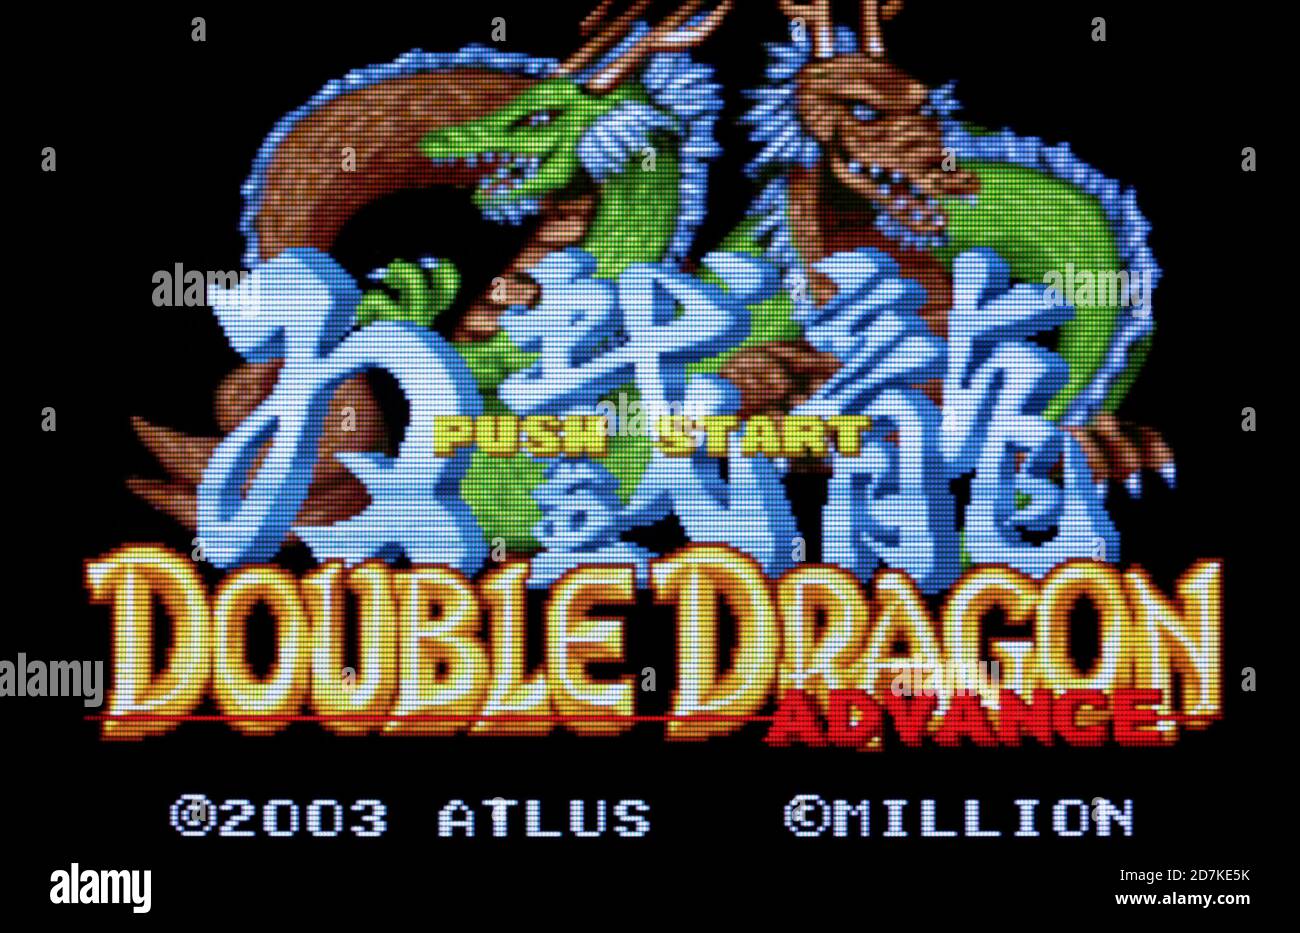 Double Dragon , Arcade Video game by Technos Japan Corp. (1987)